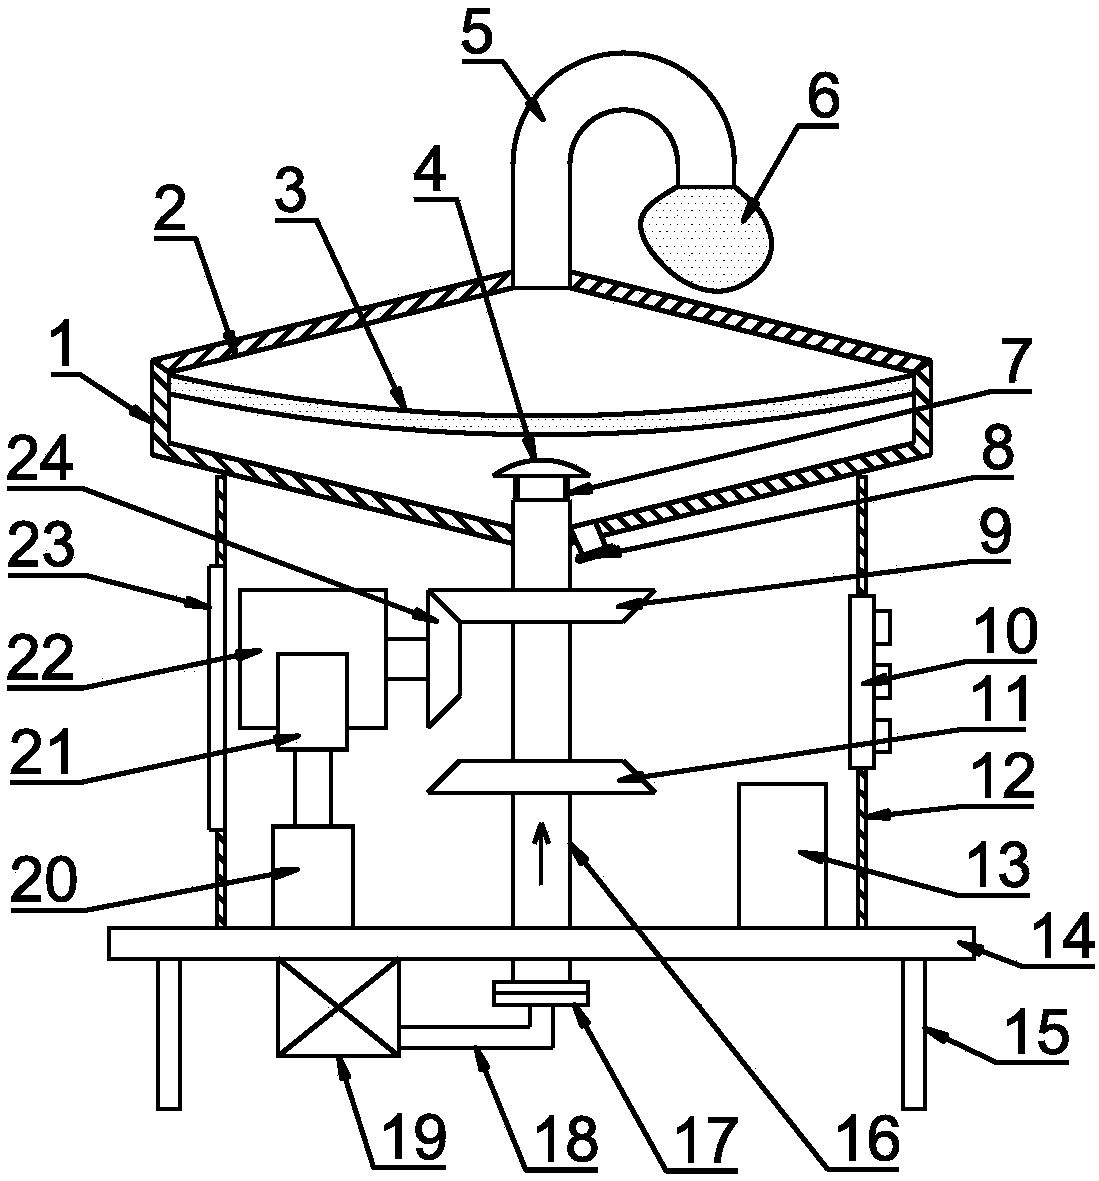 Nut drying and dust removing device